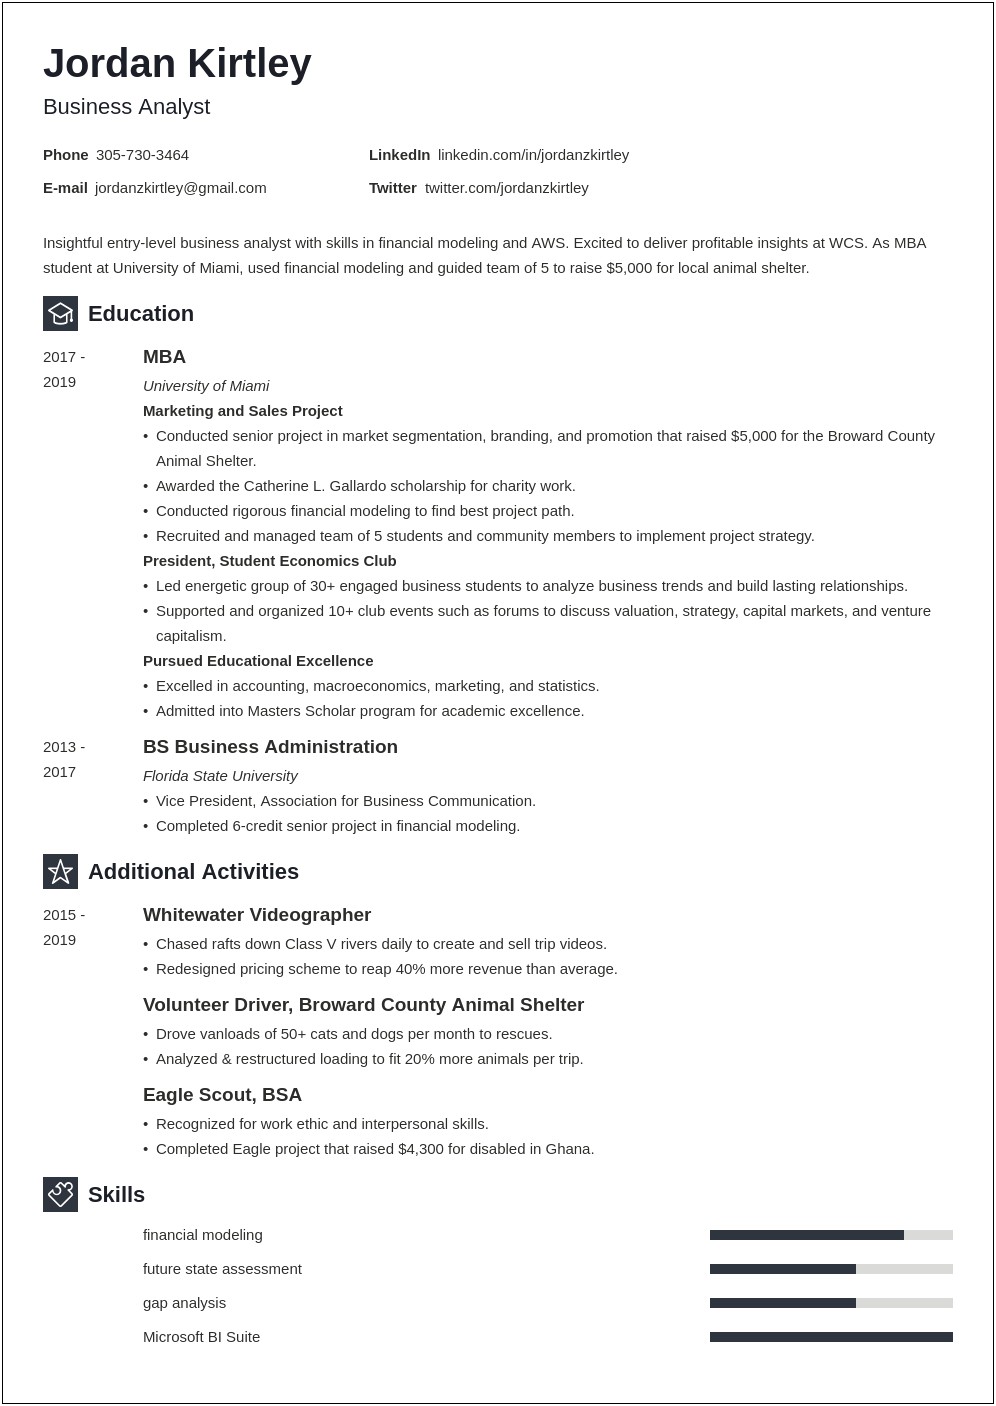 Business Analyst Resume With 6 Year Experience